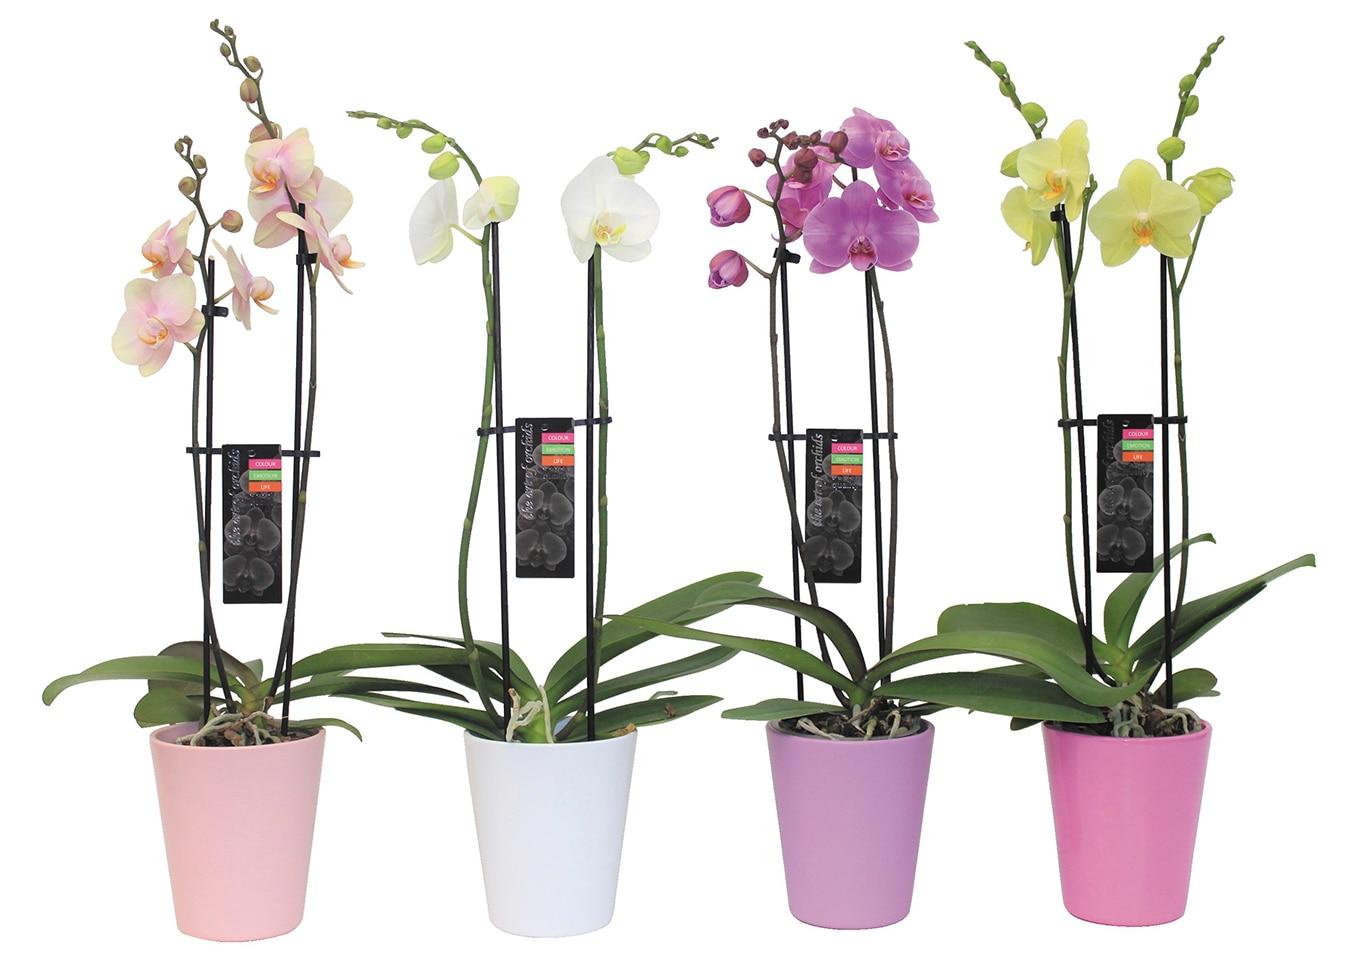 Four double stem orchids in ceramic pots side by side in pink, white, purple and yellow.